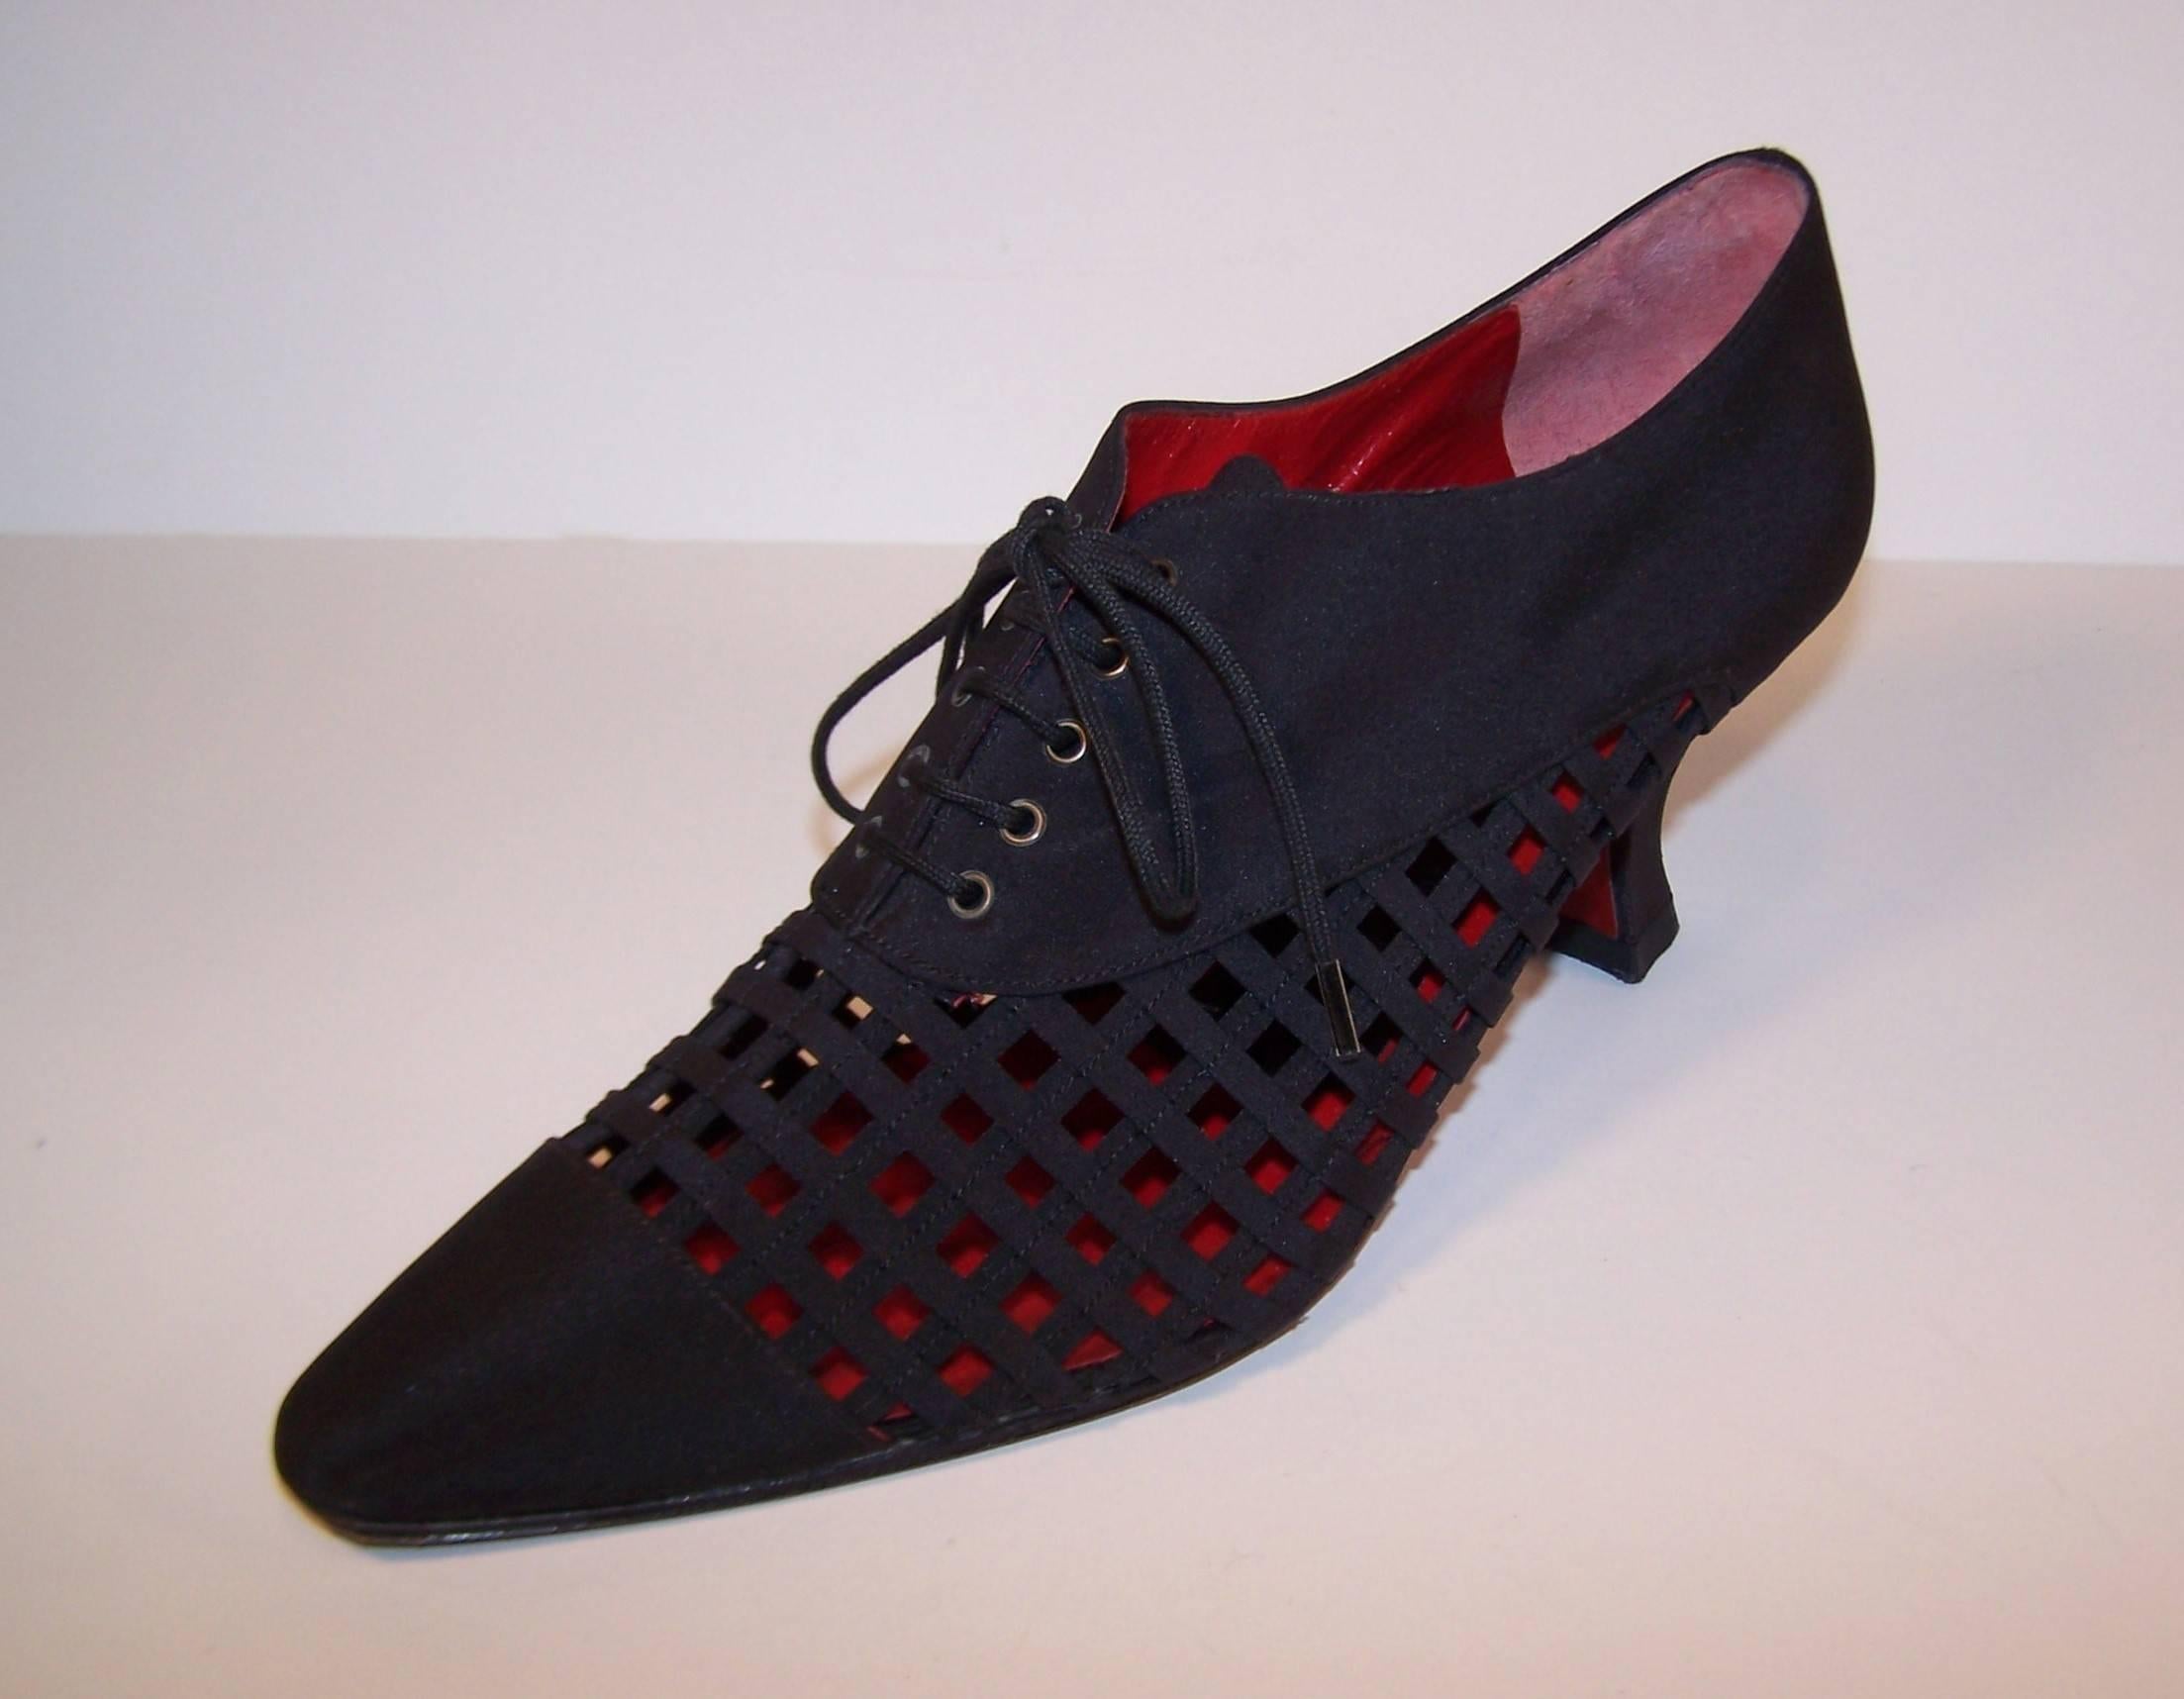 These Charles Jourdan shoes are a great combination of a Louis IV style silhouette and 1930's ladies oxford.  They lace at the vamp with comfortably curved Louis IV heel and a latticed cage design all in a heavy black silk.  The interior foot bed